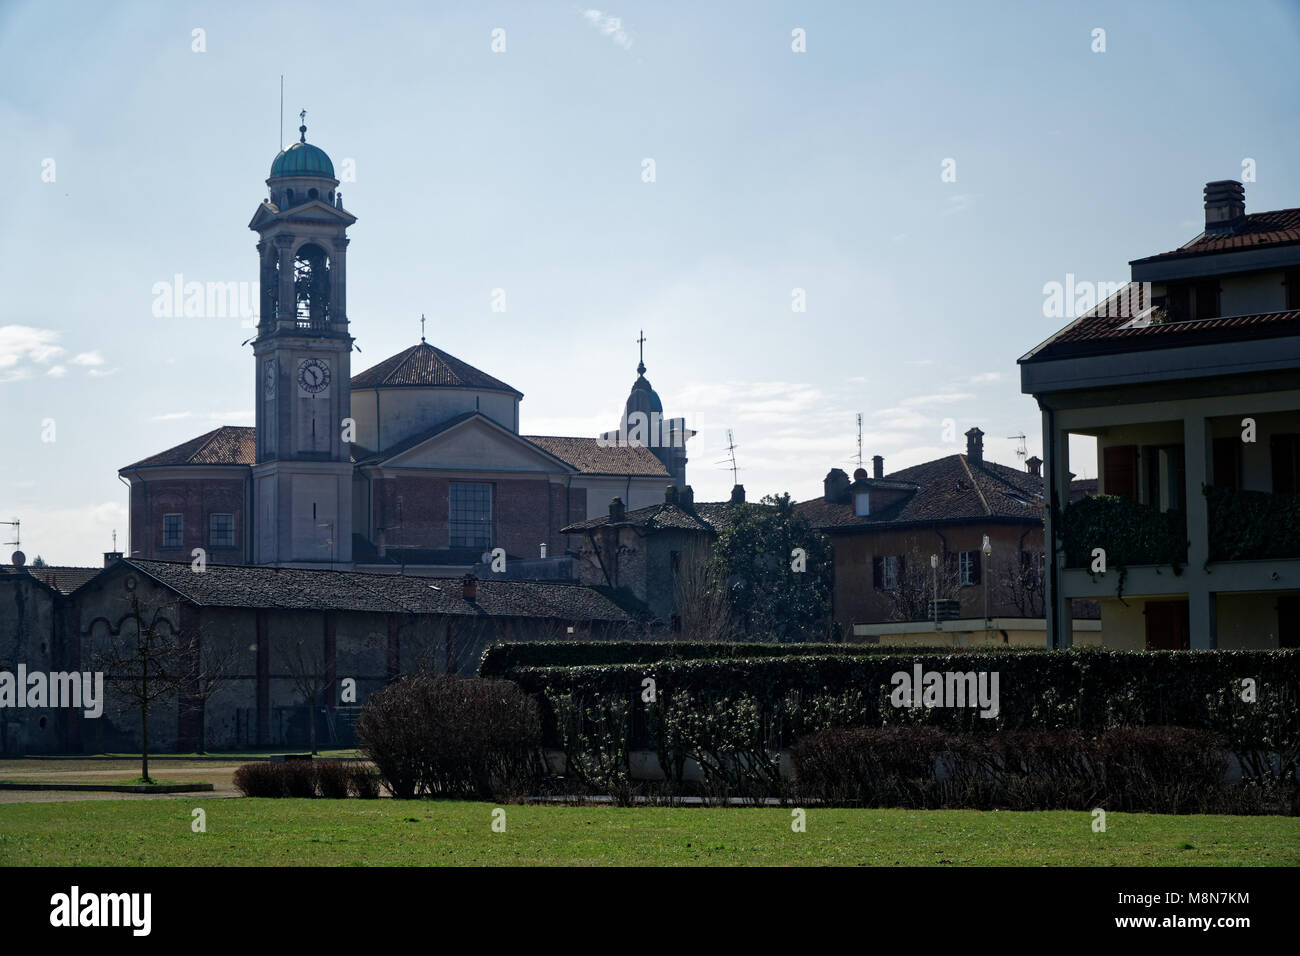 Catholic church, Robecco sul Naviglio, Milan province, Italy, 13 March 2018: Old Catholic church with bell tower, religion background. Stock Photo